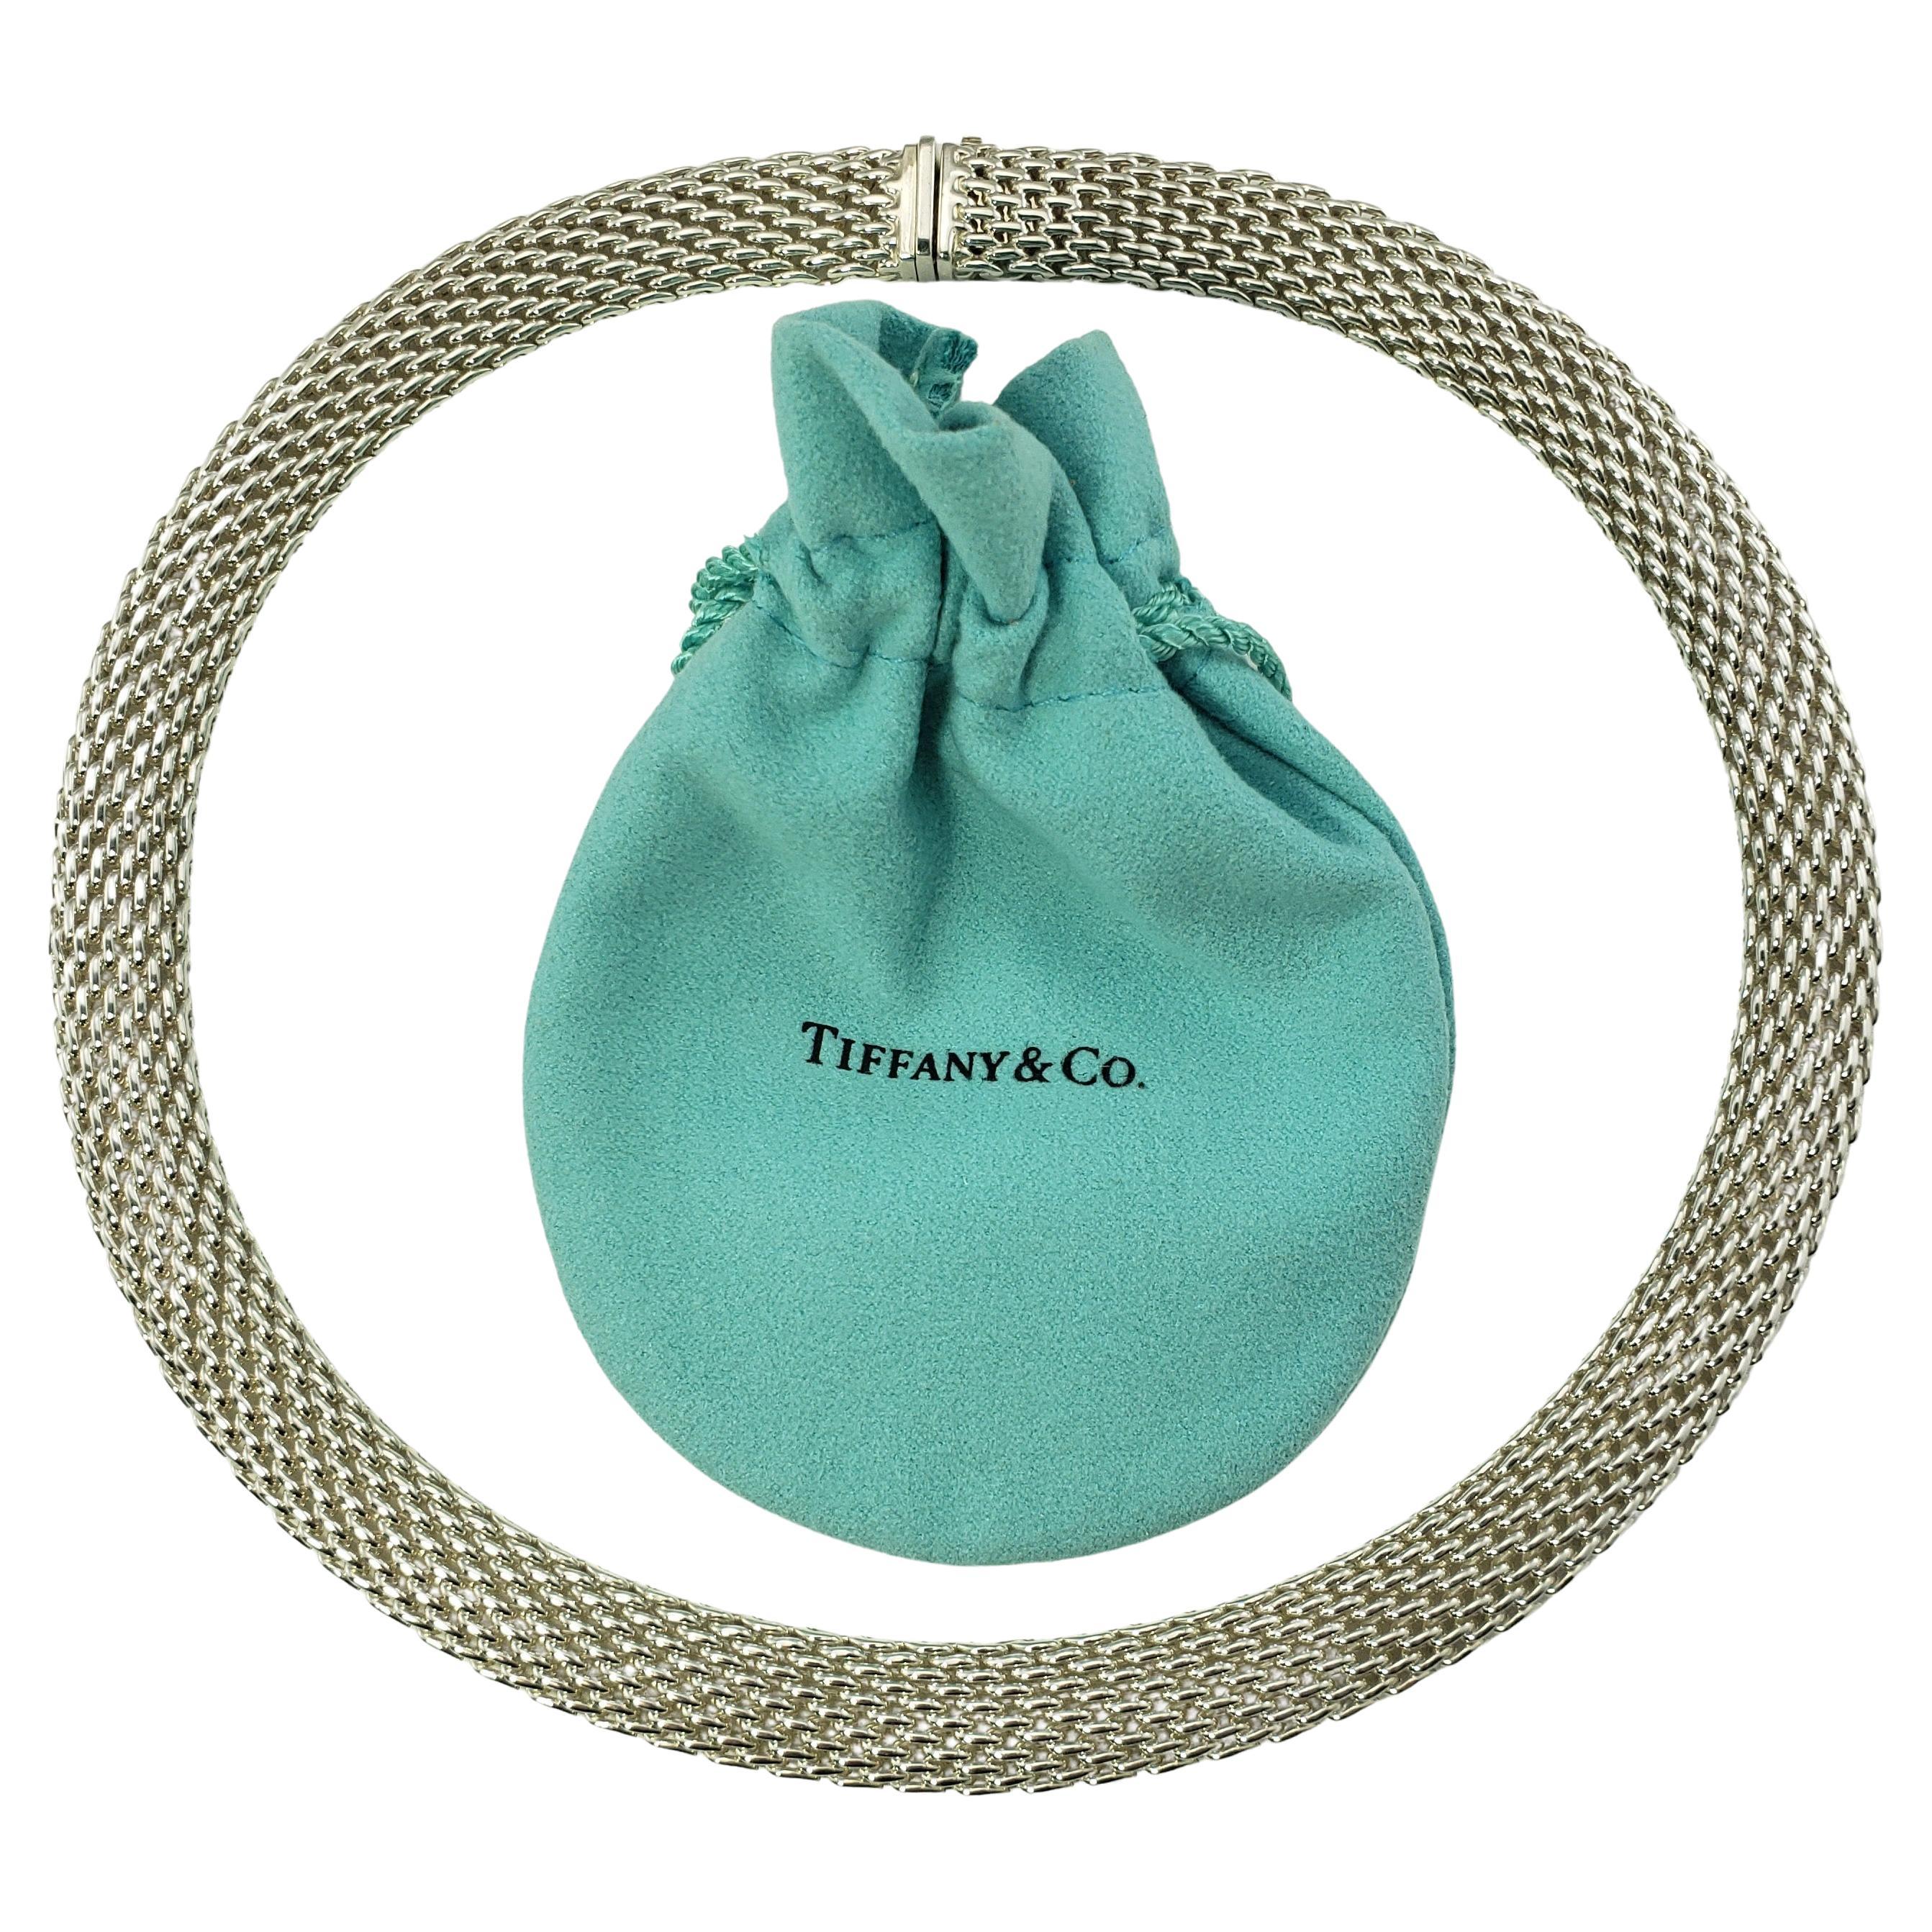 Tiffany & Co. Somerset Sterling Silver Mesh Necklace